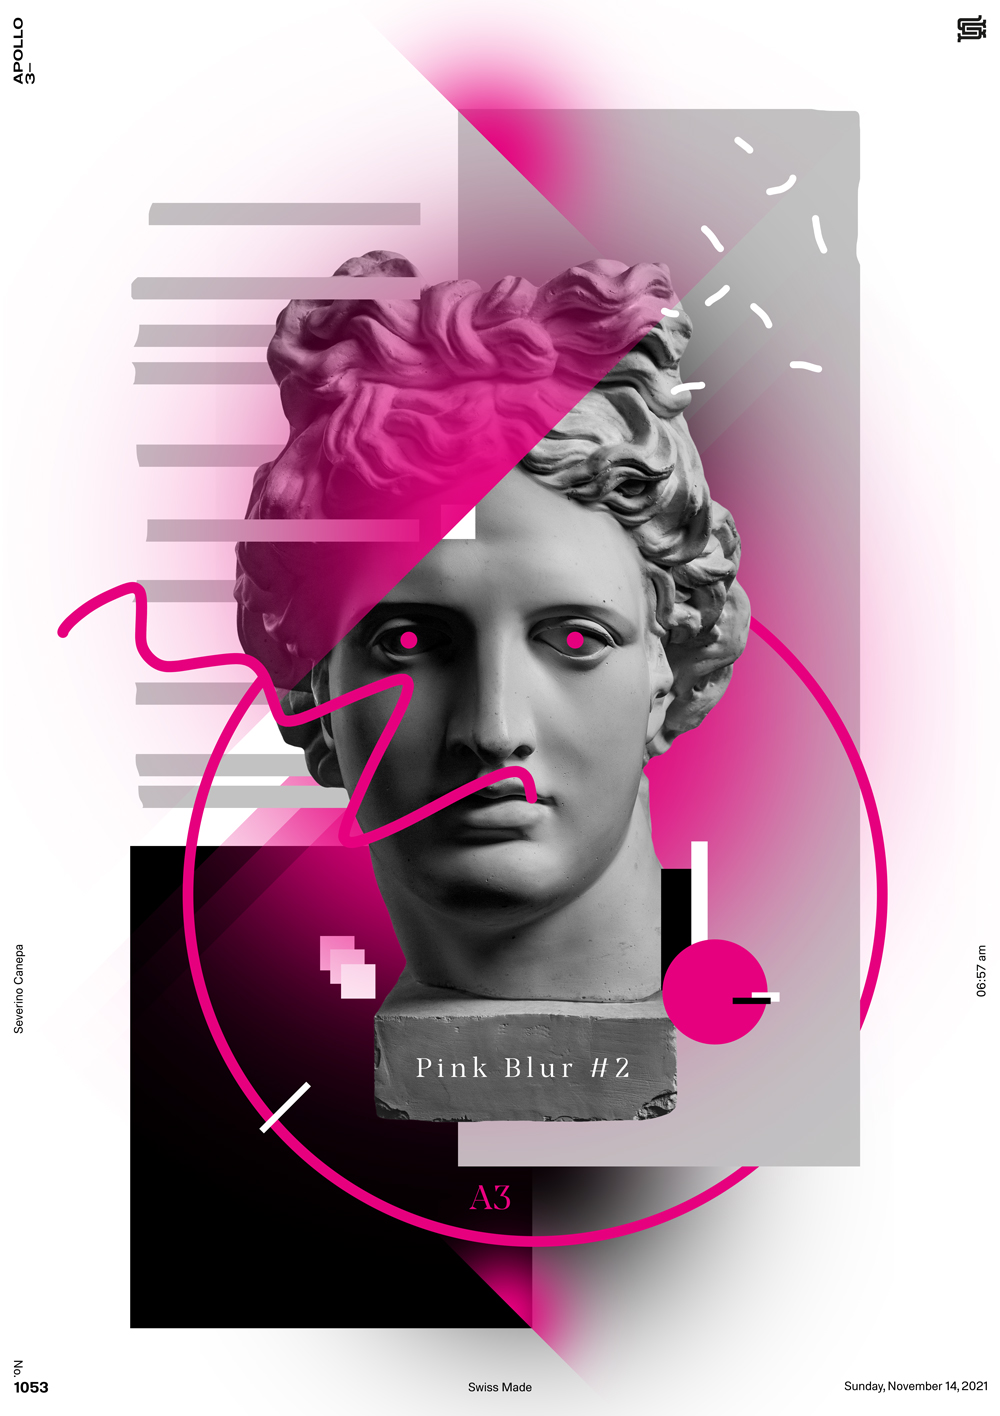 Playful digital creation I created with the Statue of Apollo, typography, and geometric forms